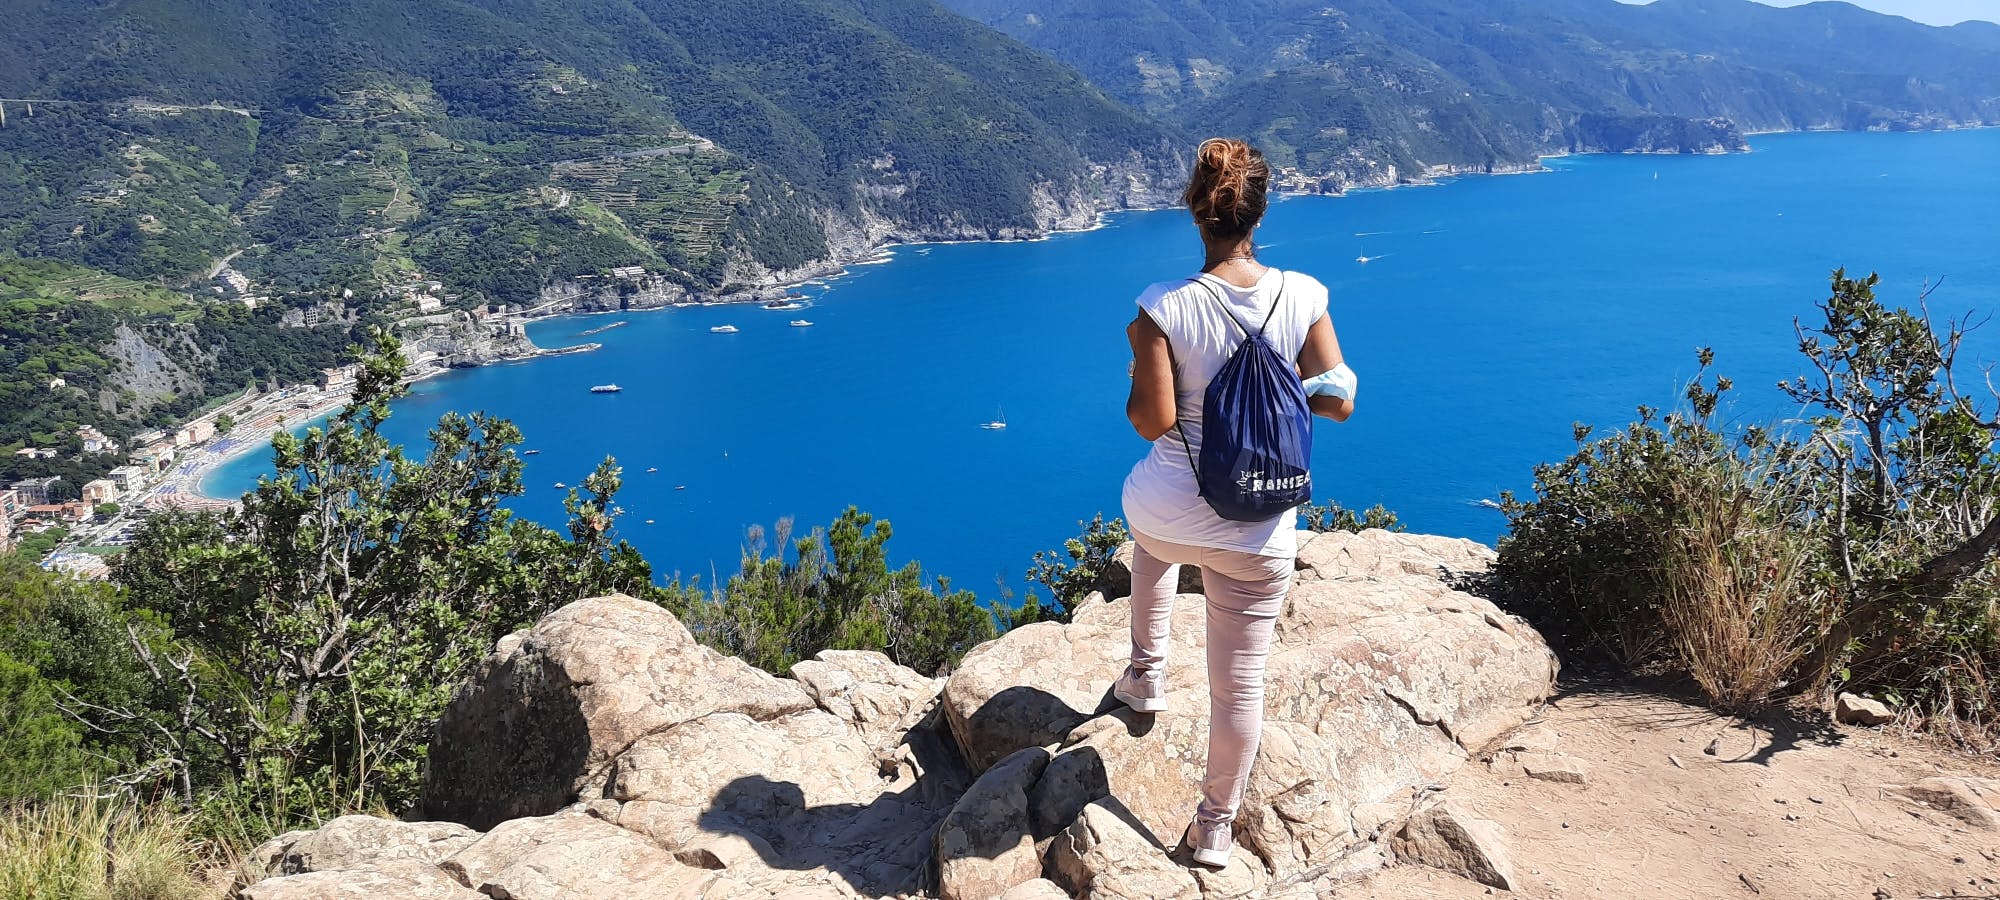 Full-day trip to Cinque Terre from Montecatini Terme